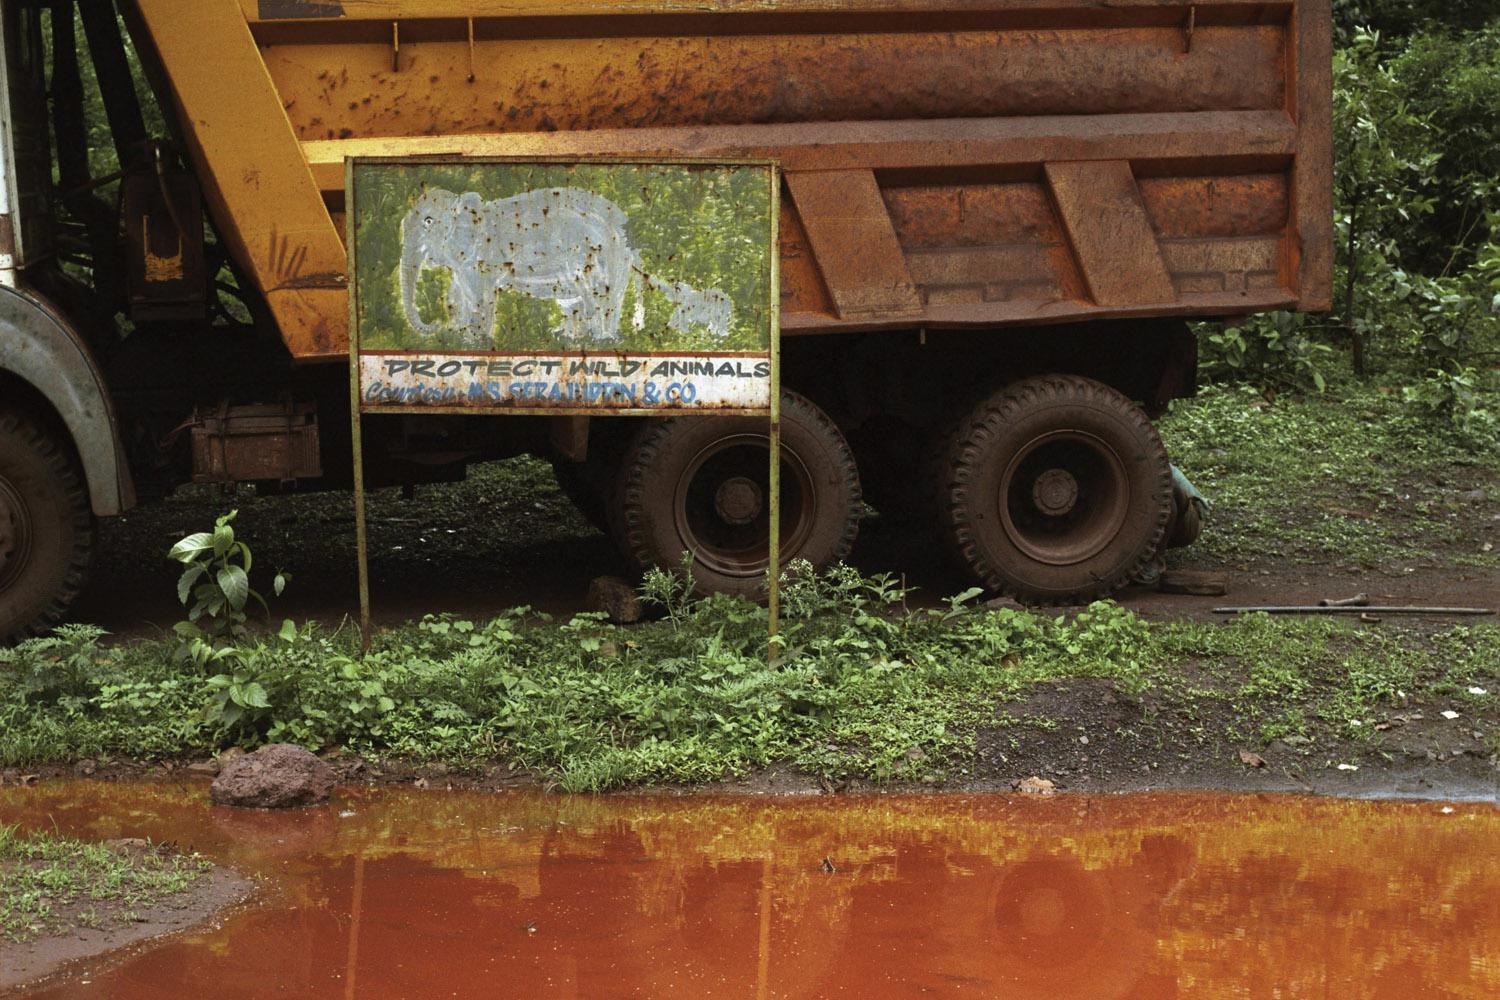  Iron ore hauling truck in Keonjhar forest, Orissa State, India. 